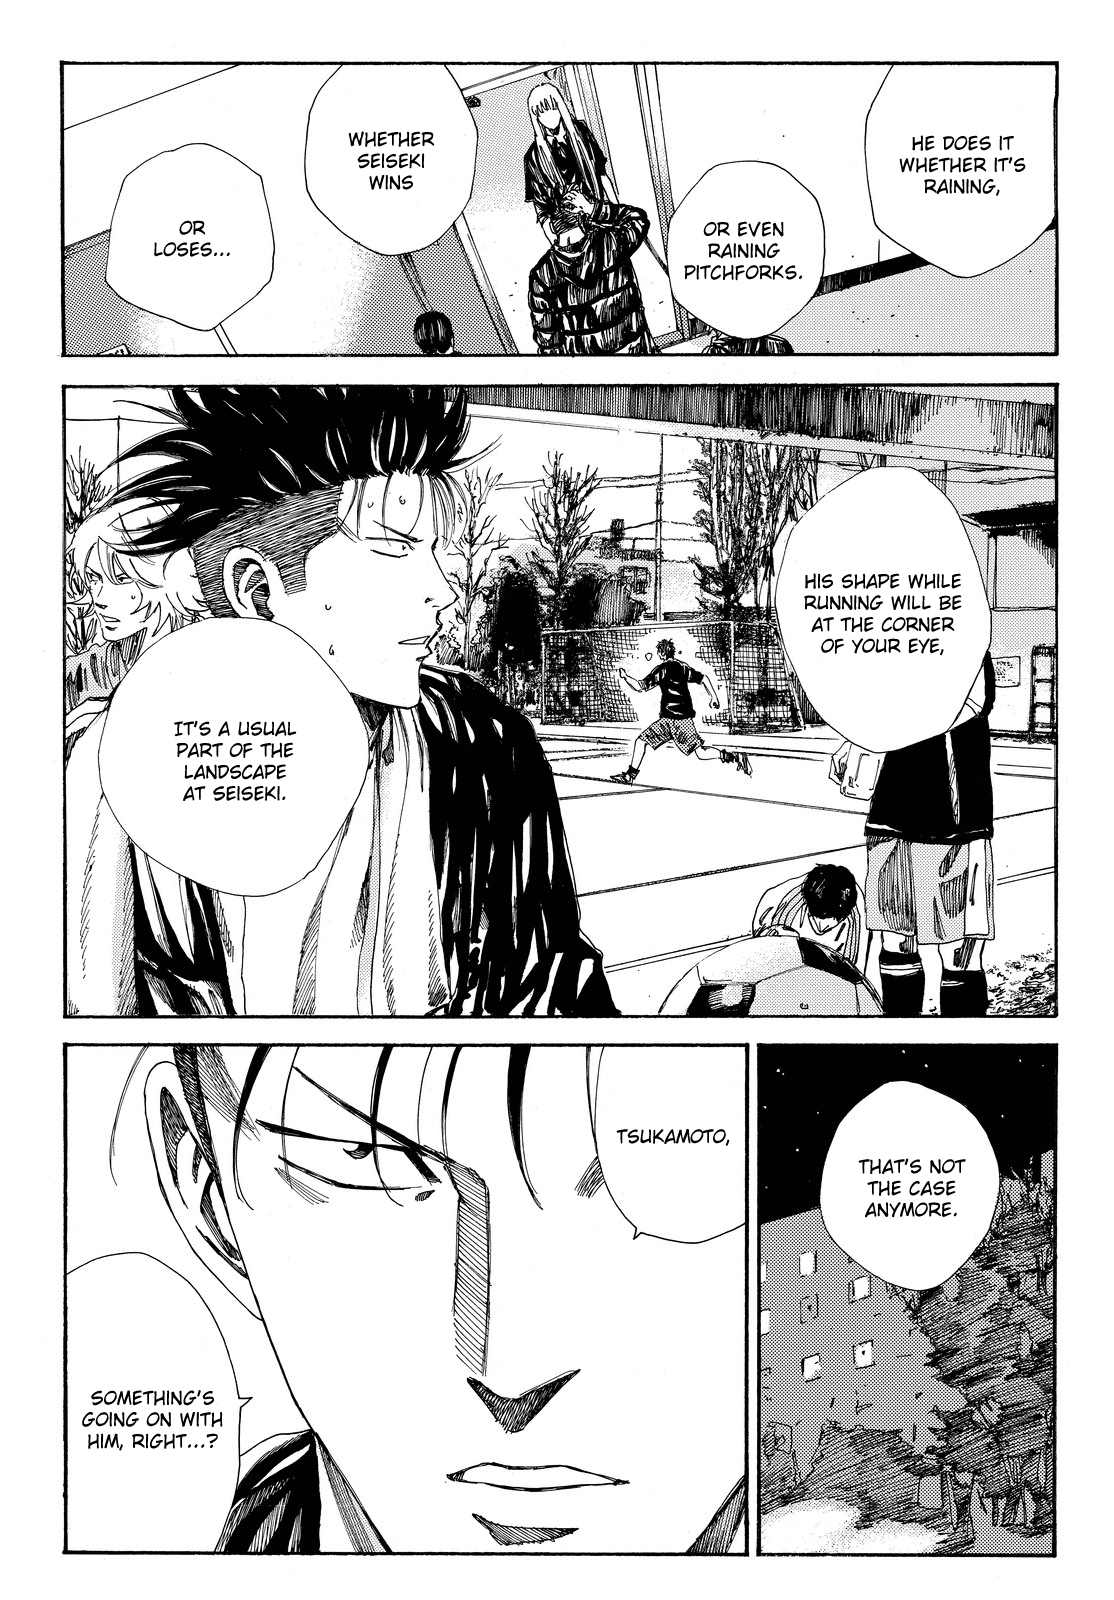 Days Vol. 19 Ch. 169 For Granted